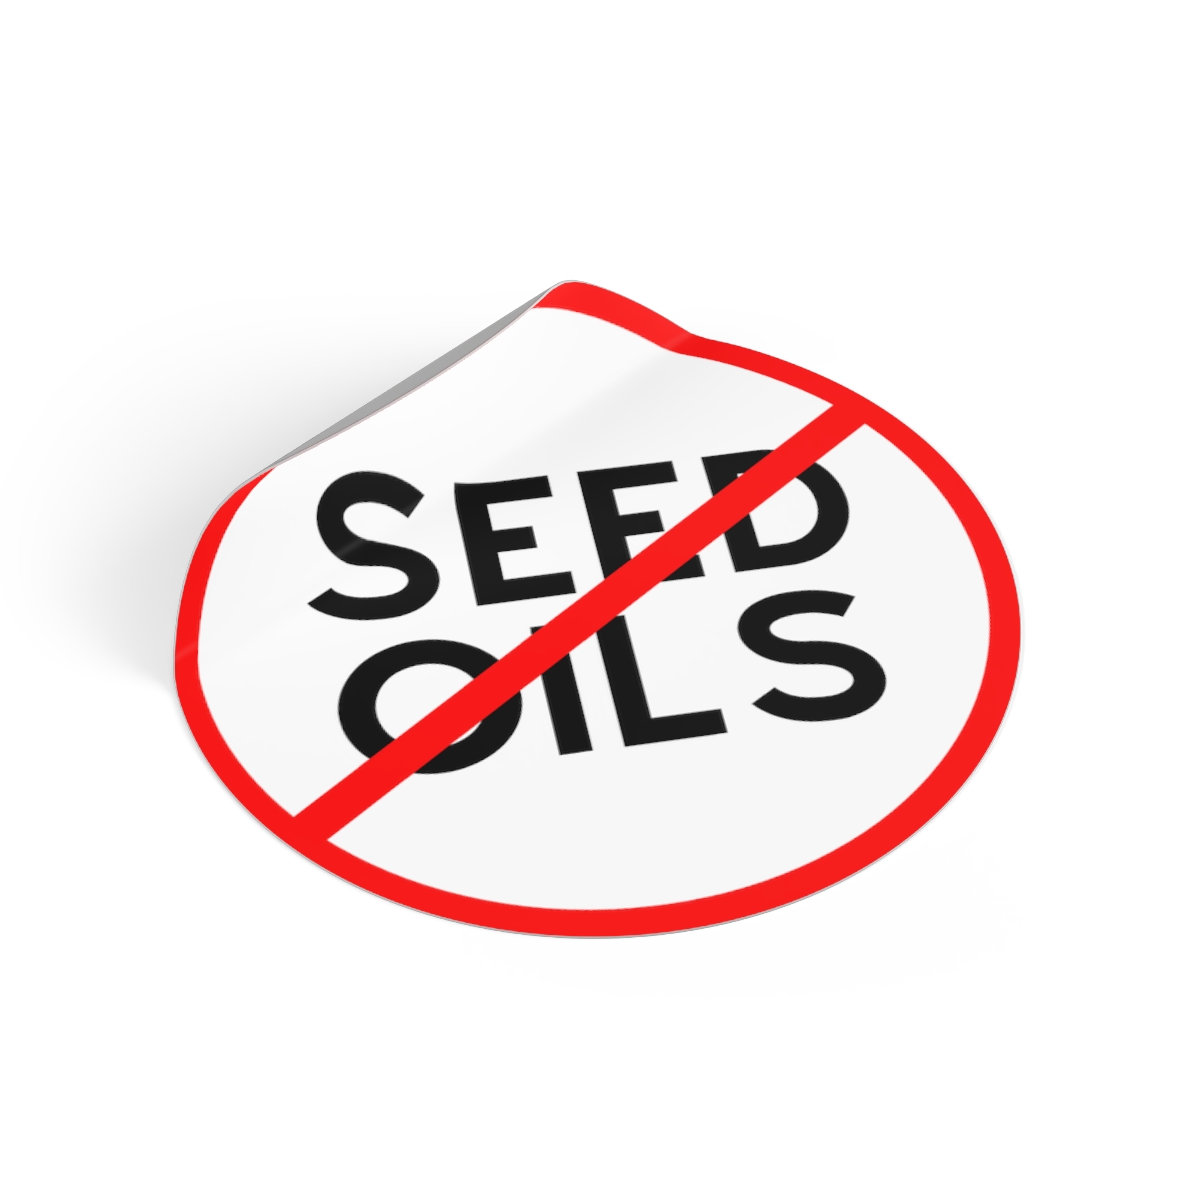 Seed Oil-Free Round Vinyl Sticker product thumbnail image